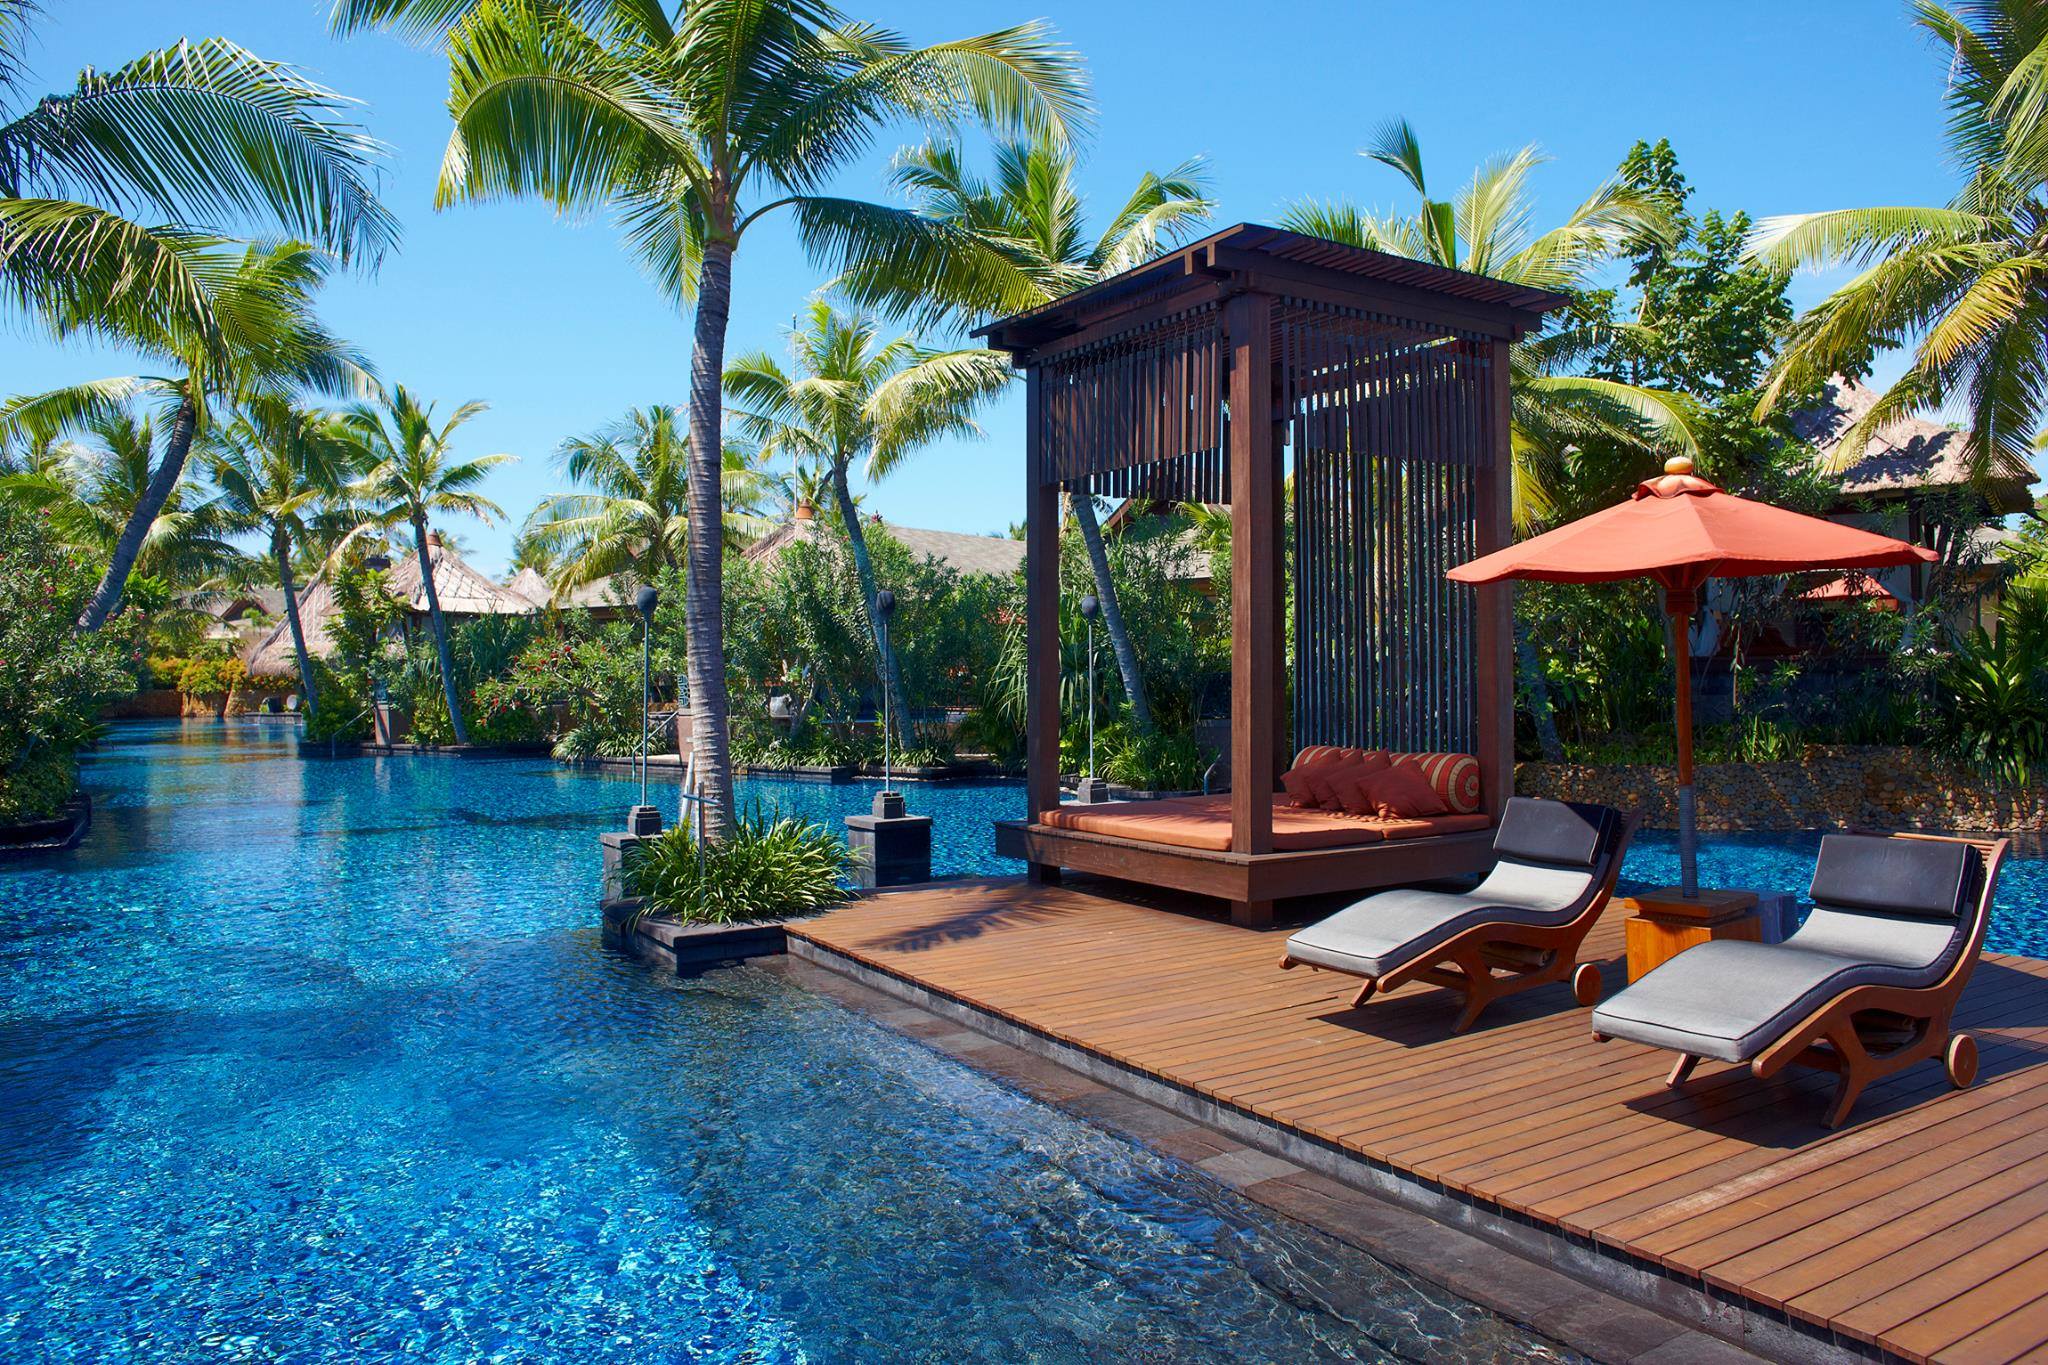 Top 10 Beach Resorts For Best Luxury Stay in Bali, Indonesia